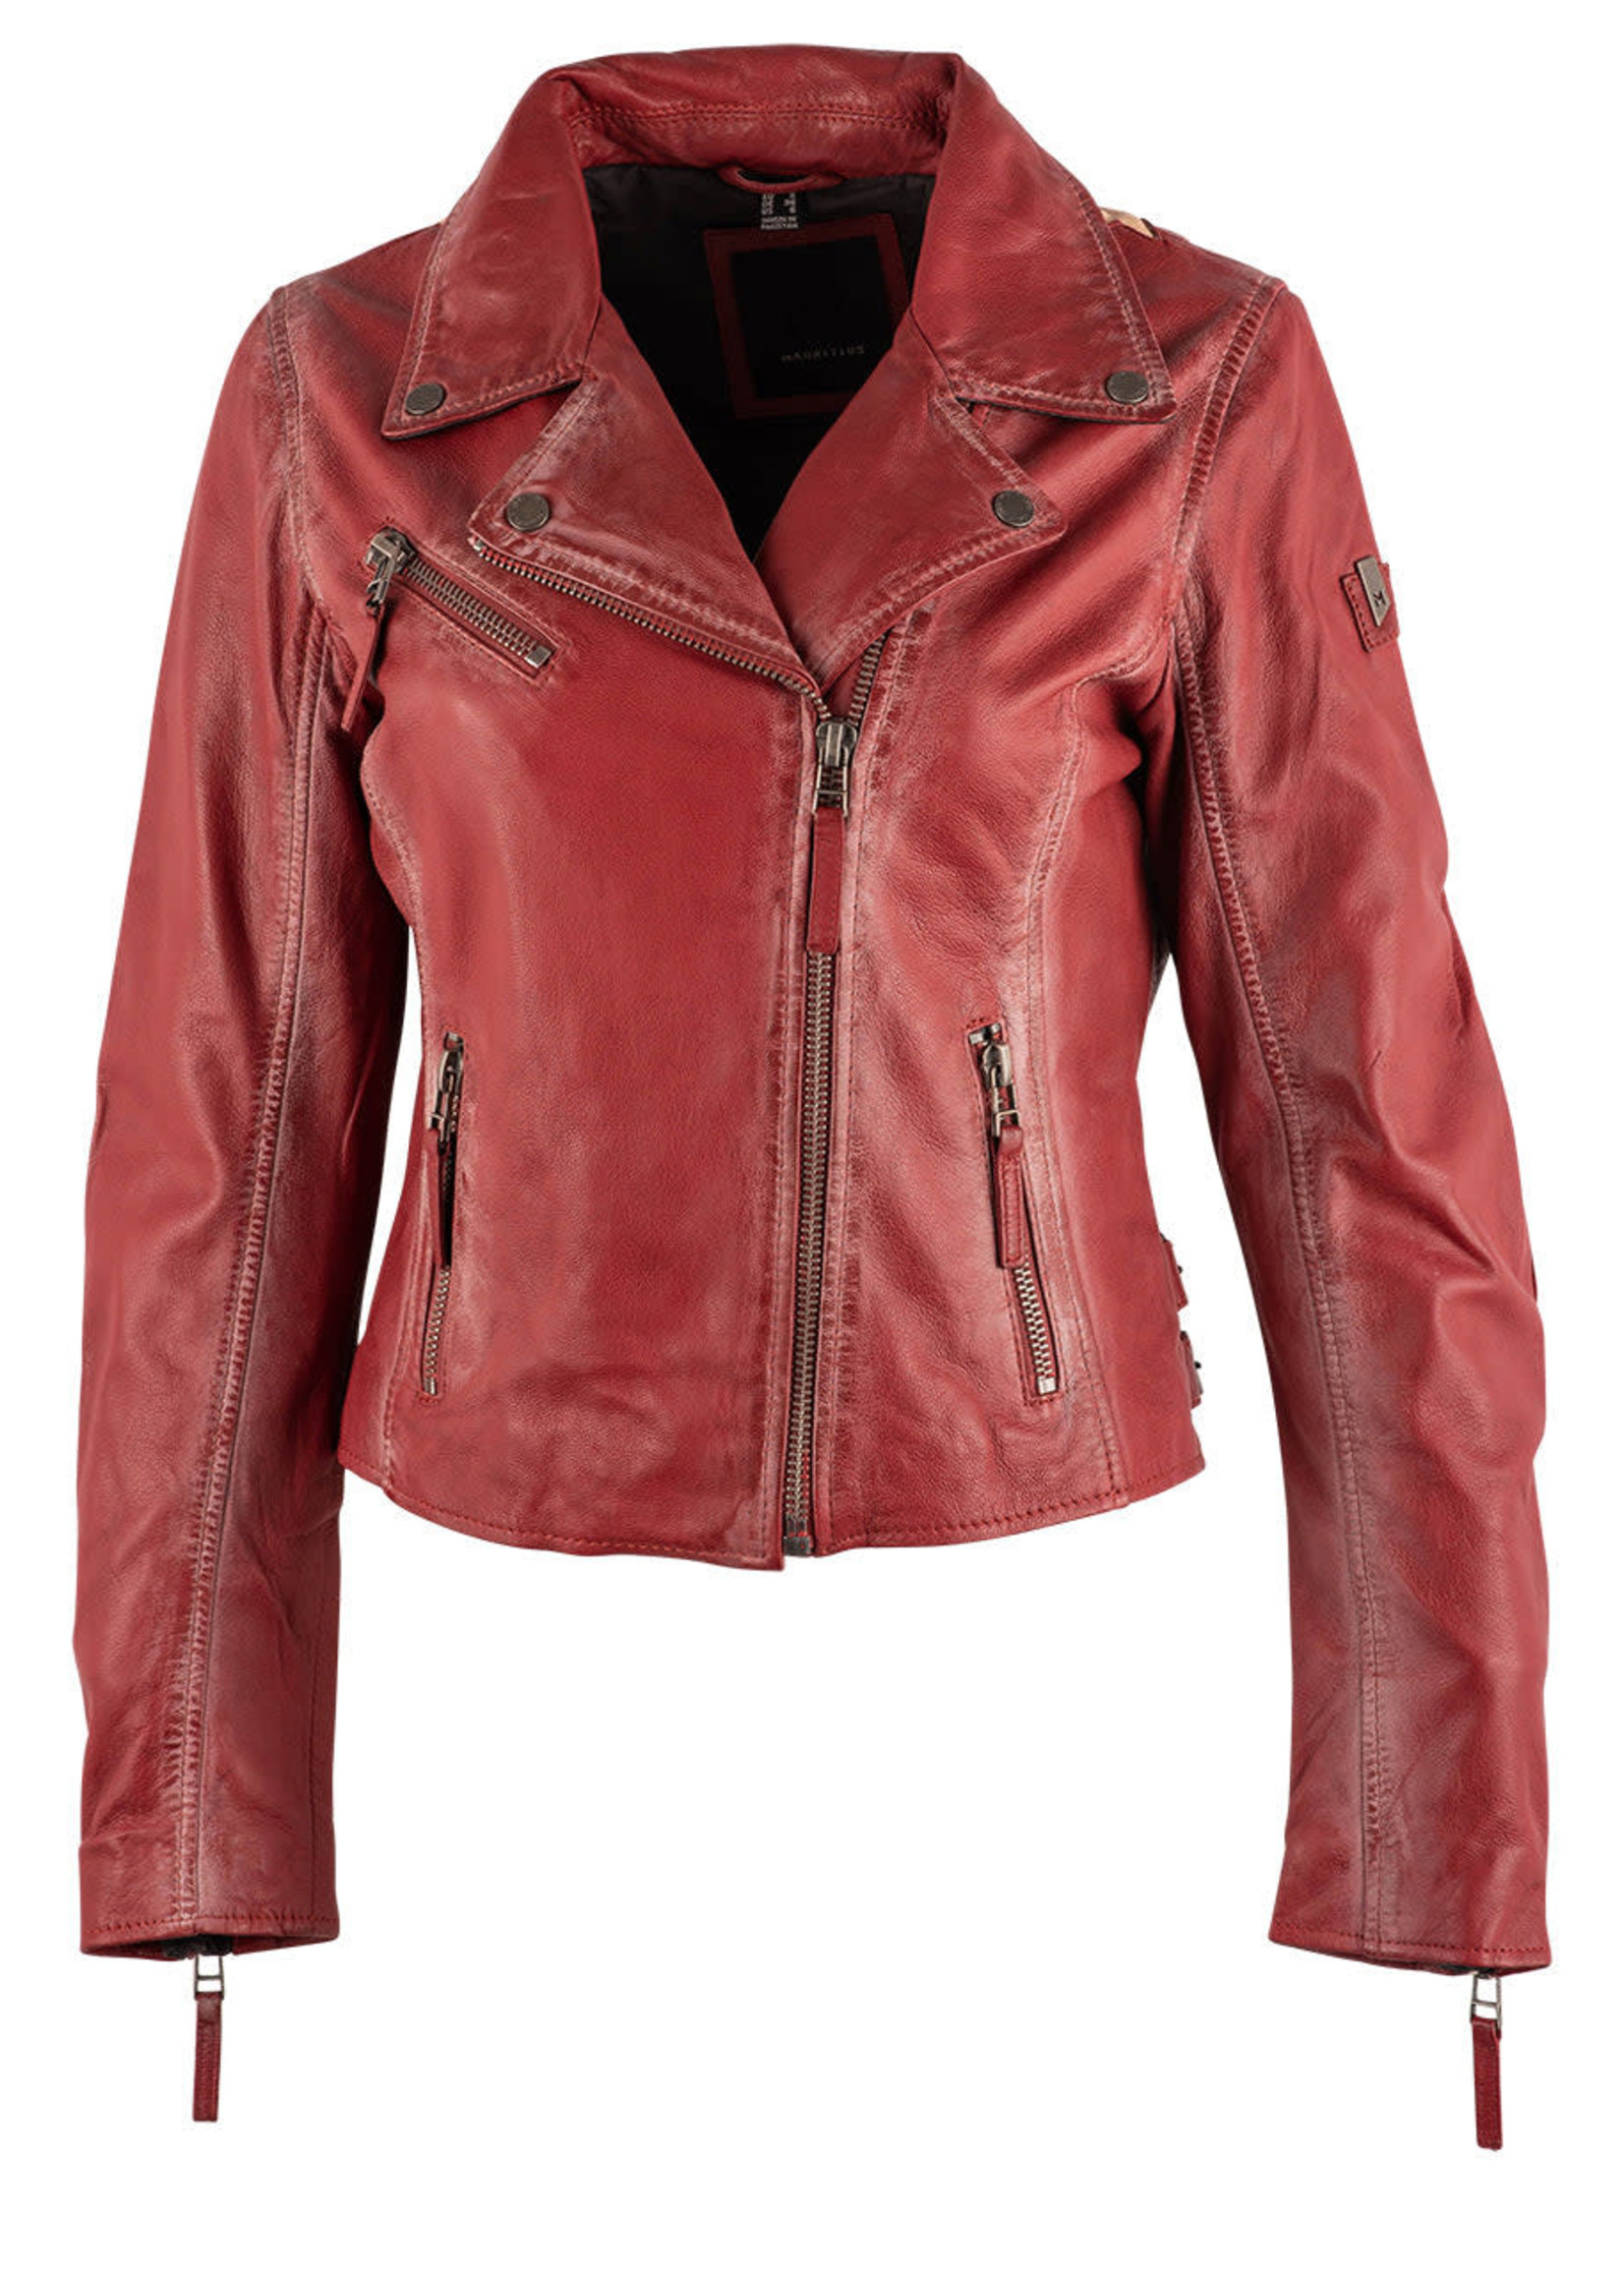 Mauritius Christy Red Leather Star Jacket